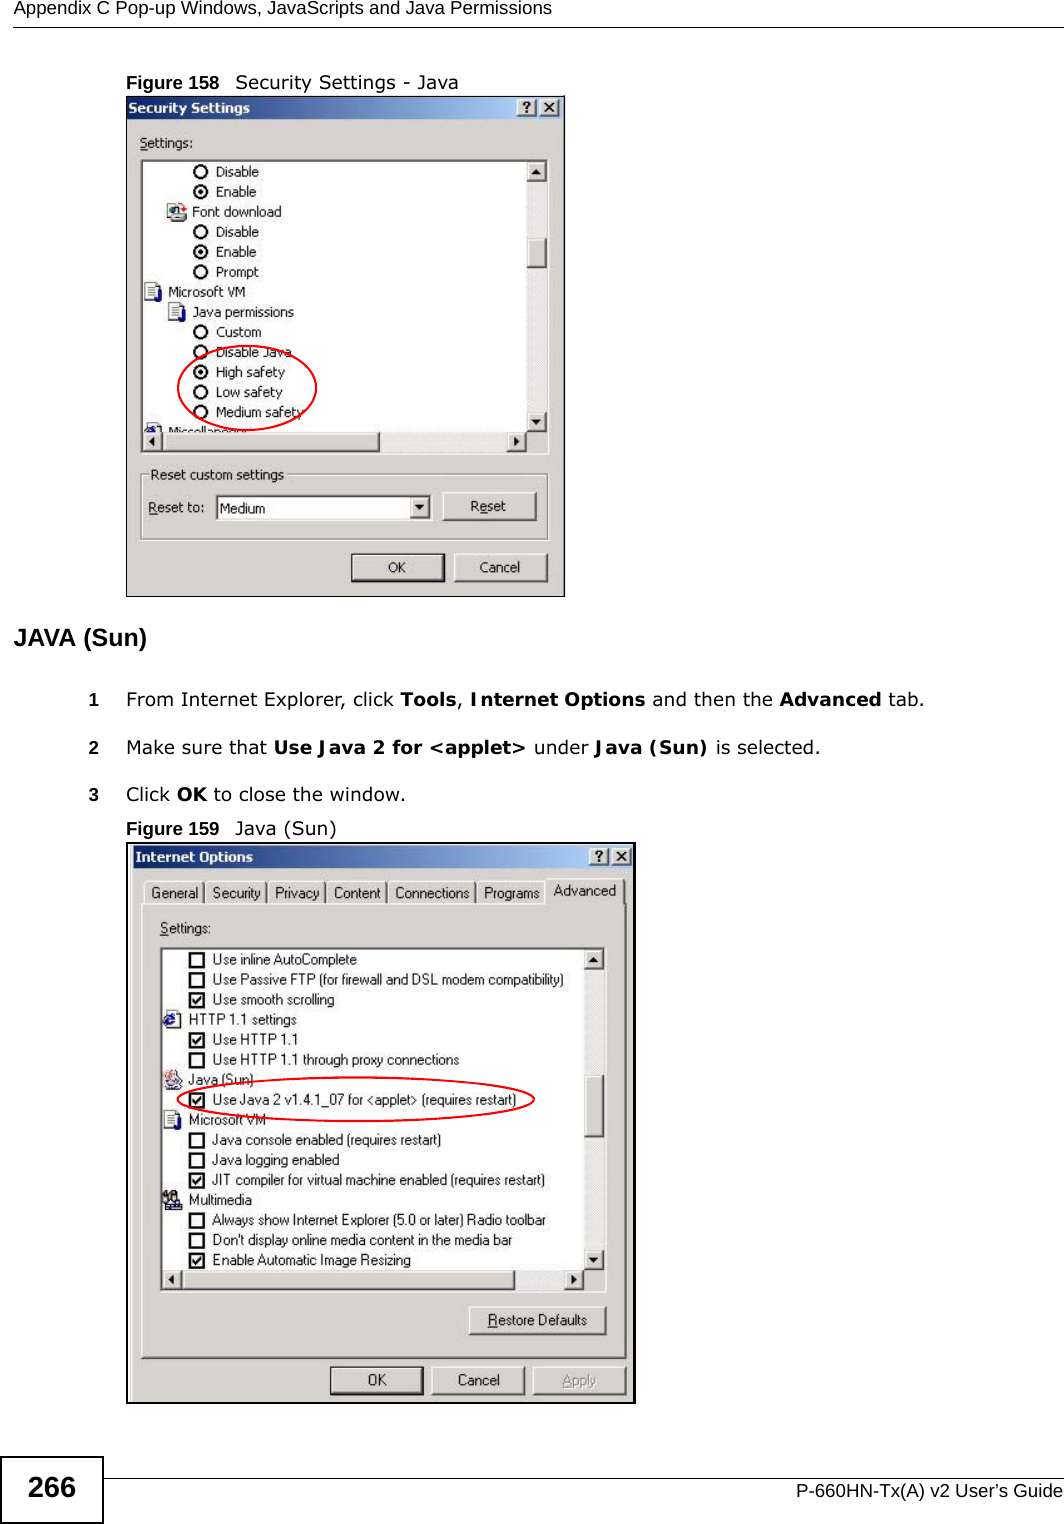 Appendix C Pop-up Windows, JavaScripts and Java PermissionsP-660HN-Tx(A) v2 User’s Guide266Figure 158   Security Settings - Java JAVA (Sun)1From Internet Explorer, click Tools, Internet Options and then the Advanced tab. 2Make sure that Use Java 2 for &lt;applet&gt; under Java (Sun) is selected.3Click OK to close the window.Figure 159   Java (Sun)